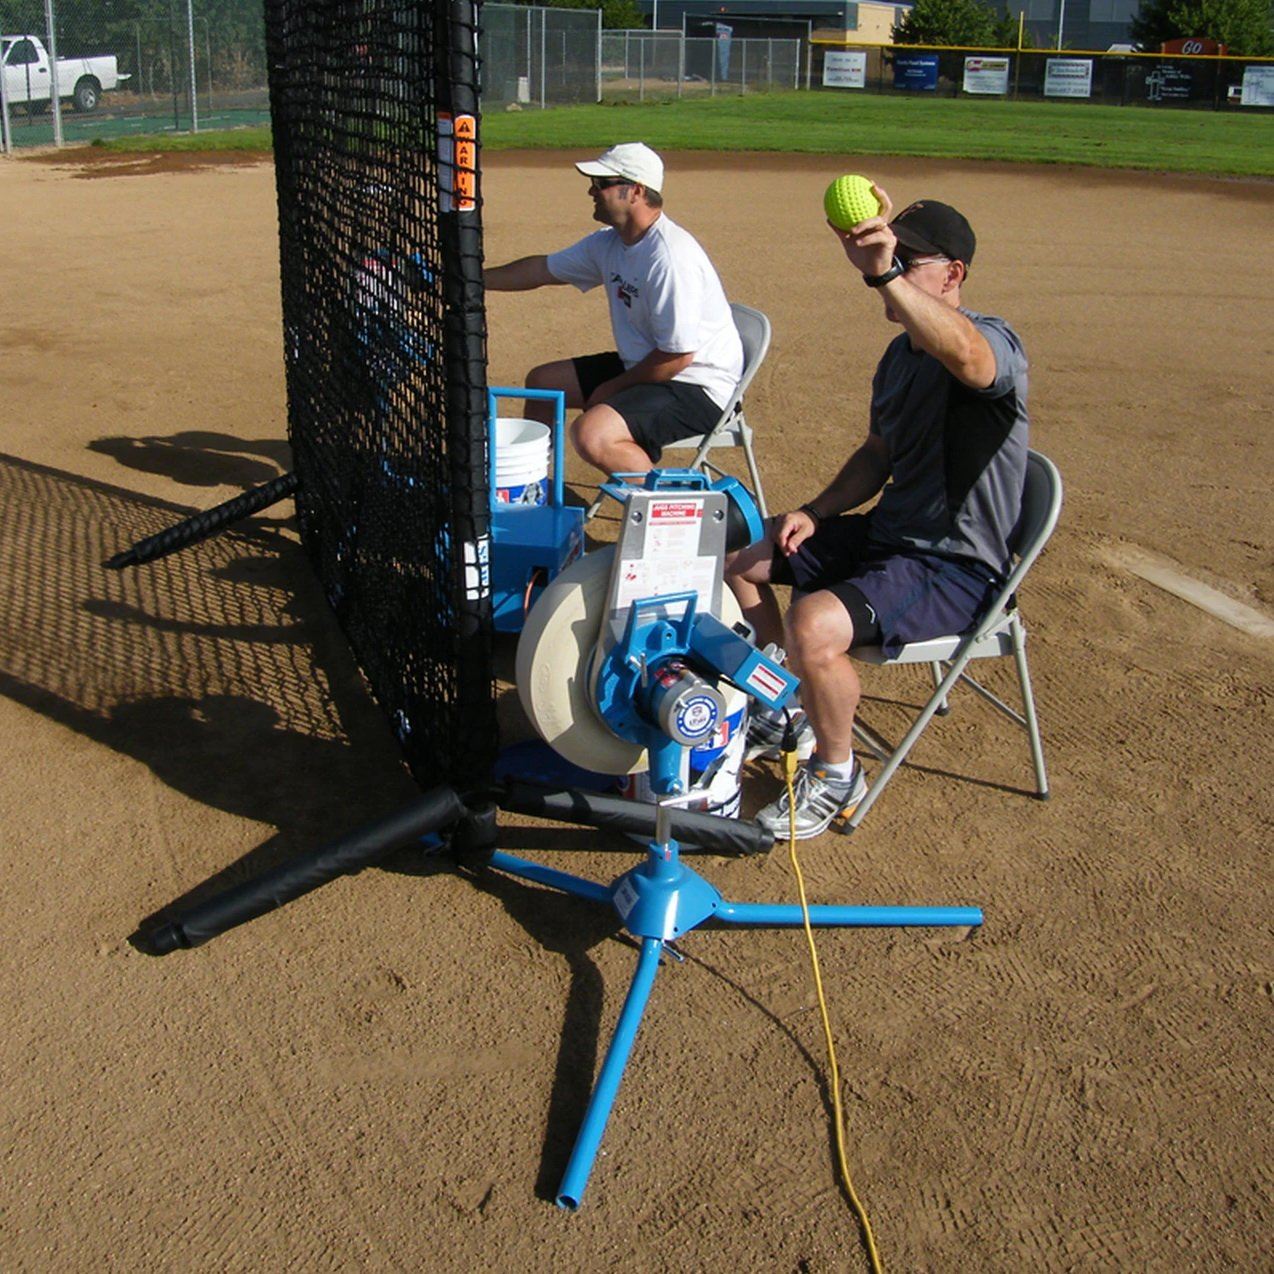 Jugs BP1 Pitching Machines for Softball used for Practice